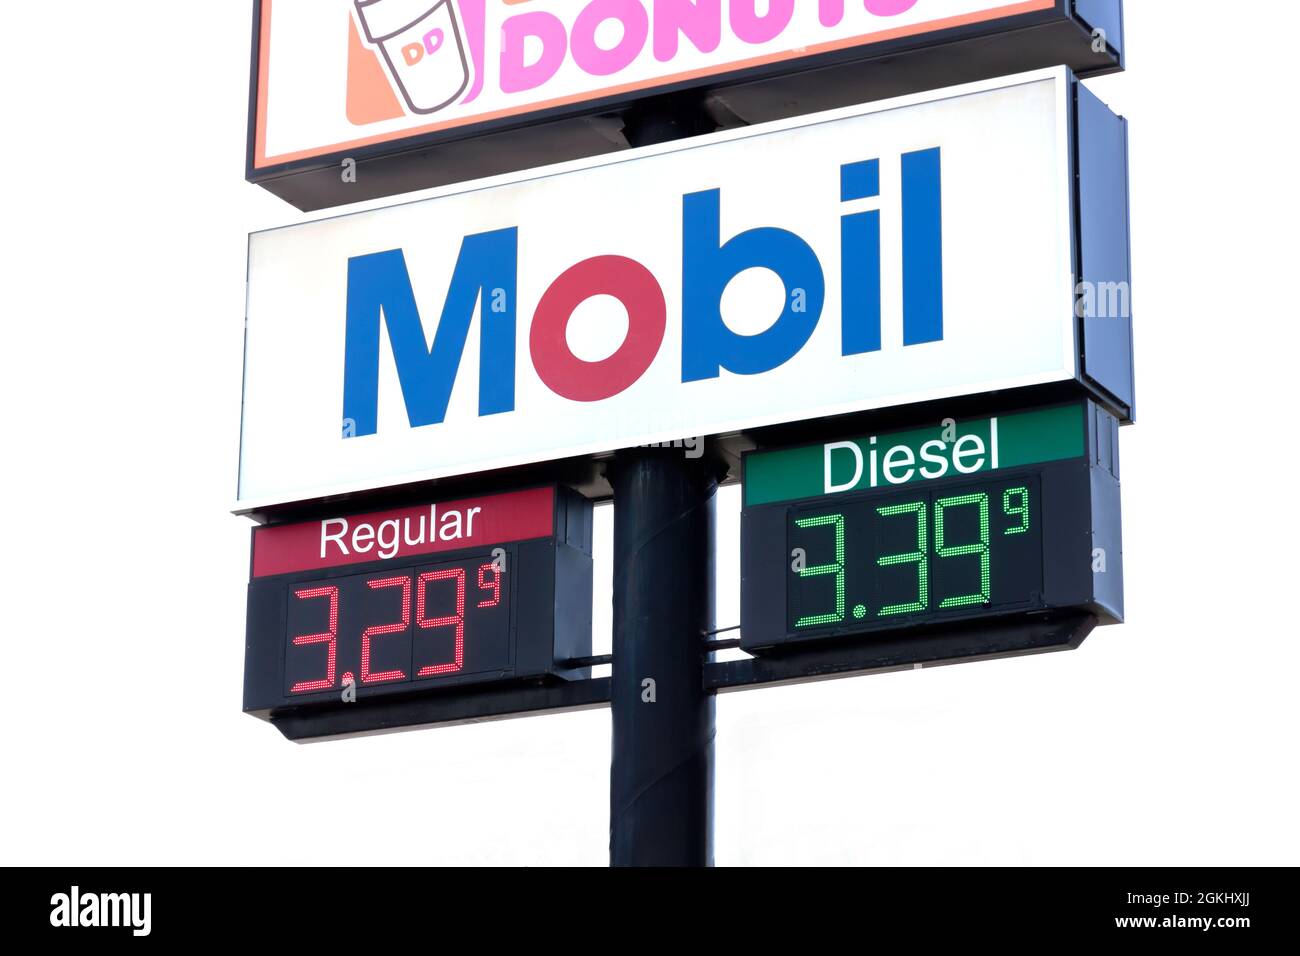 Mobil sign advertising regular and diesel gas prices. Stock Photo